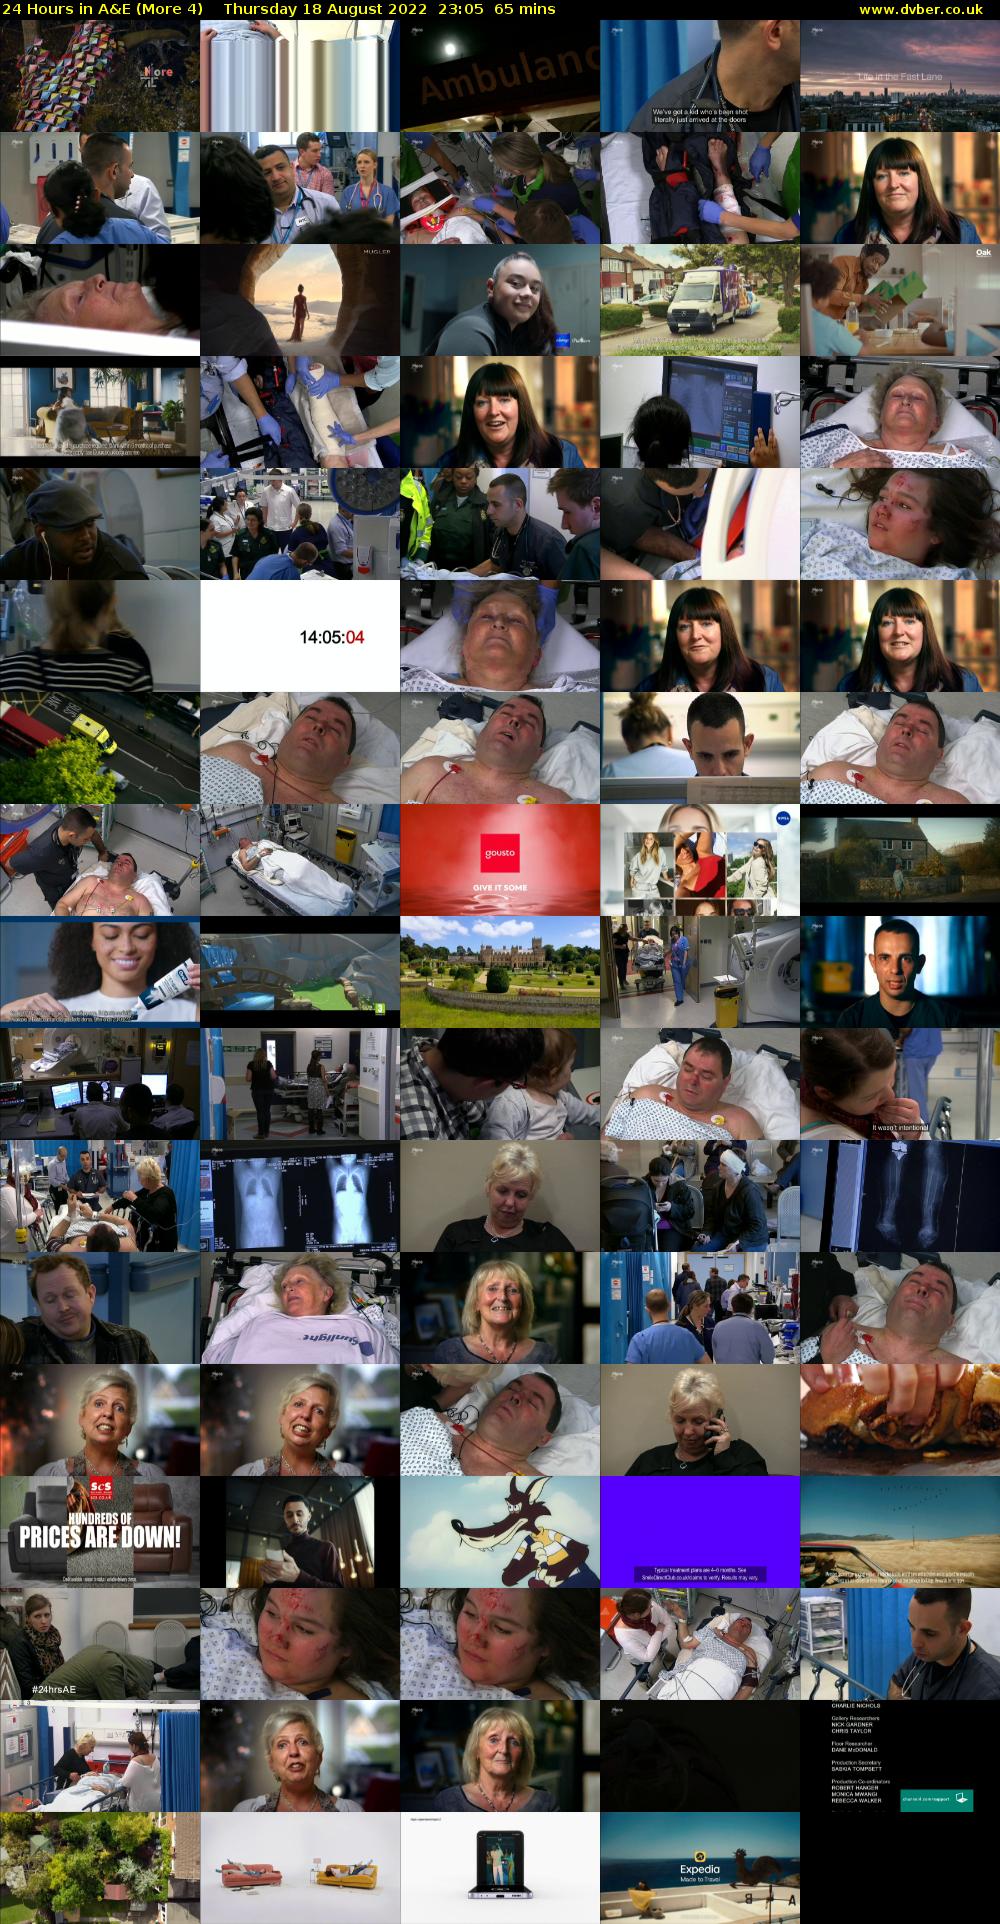 24 Hours in A&E (More 4) Thursday 18 August 2022 23:05 - 00:10